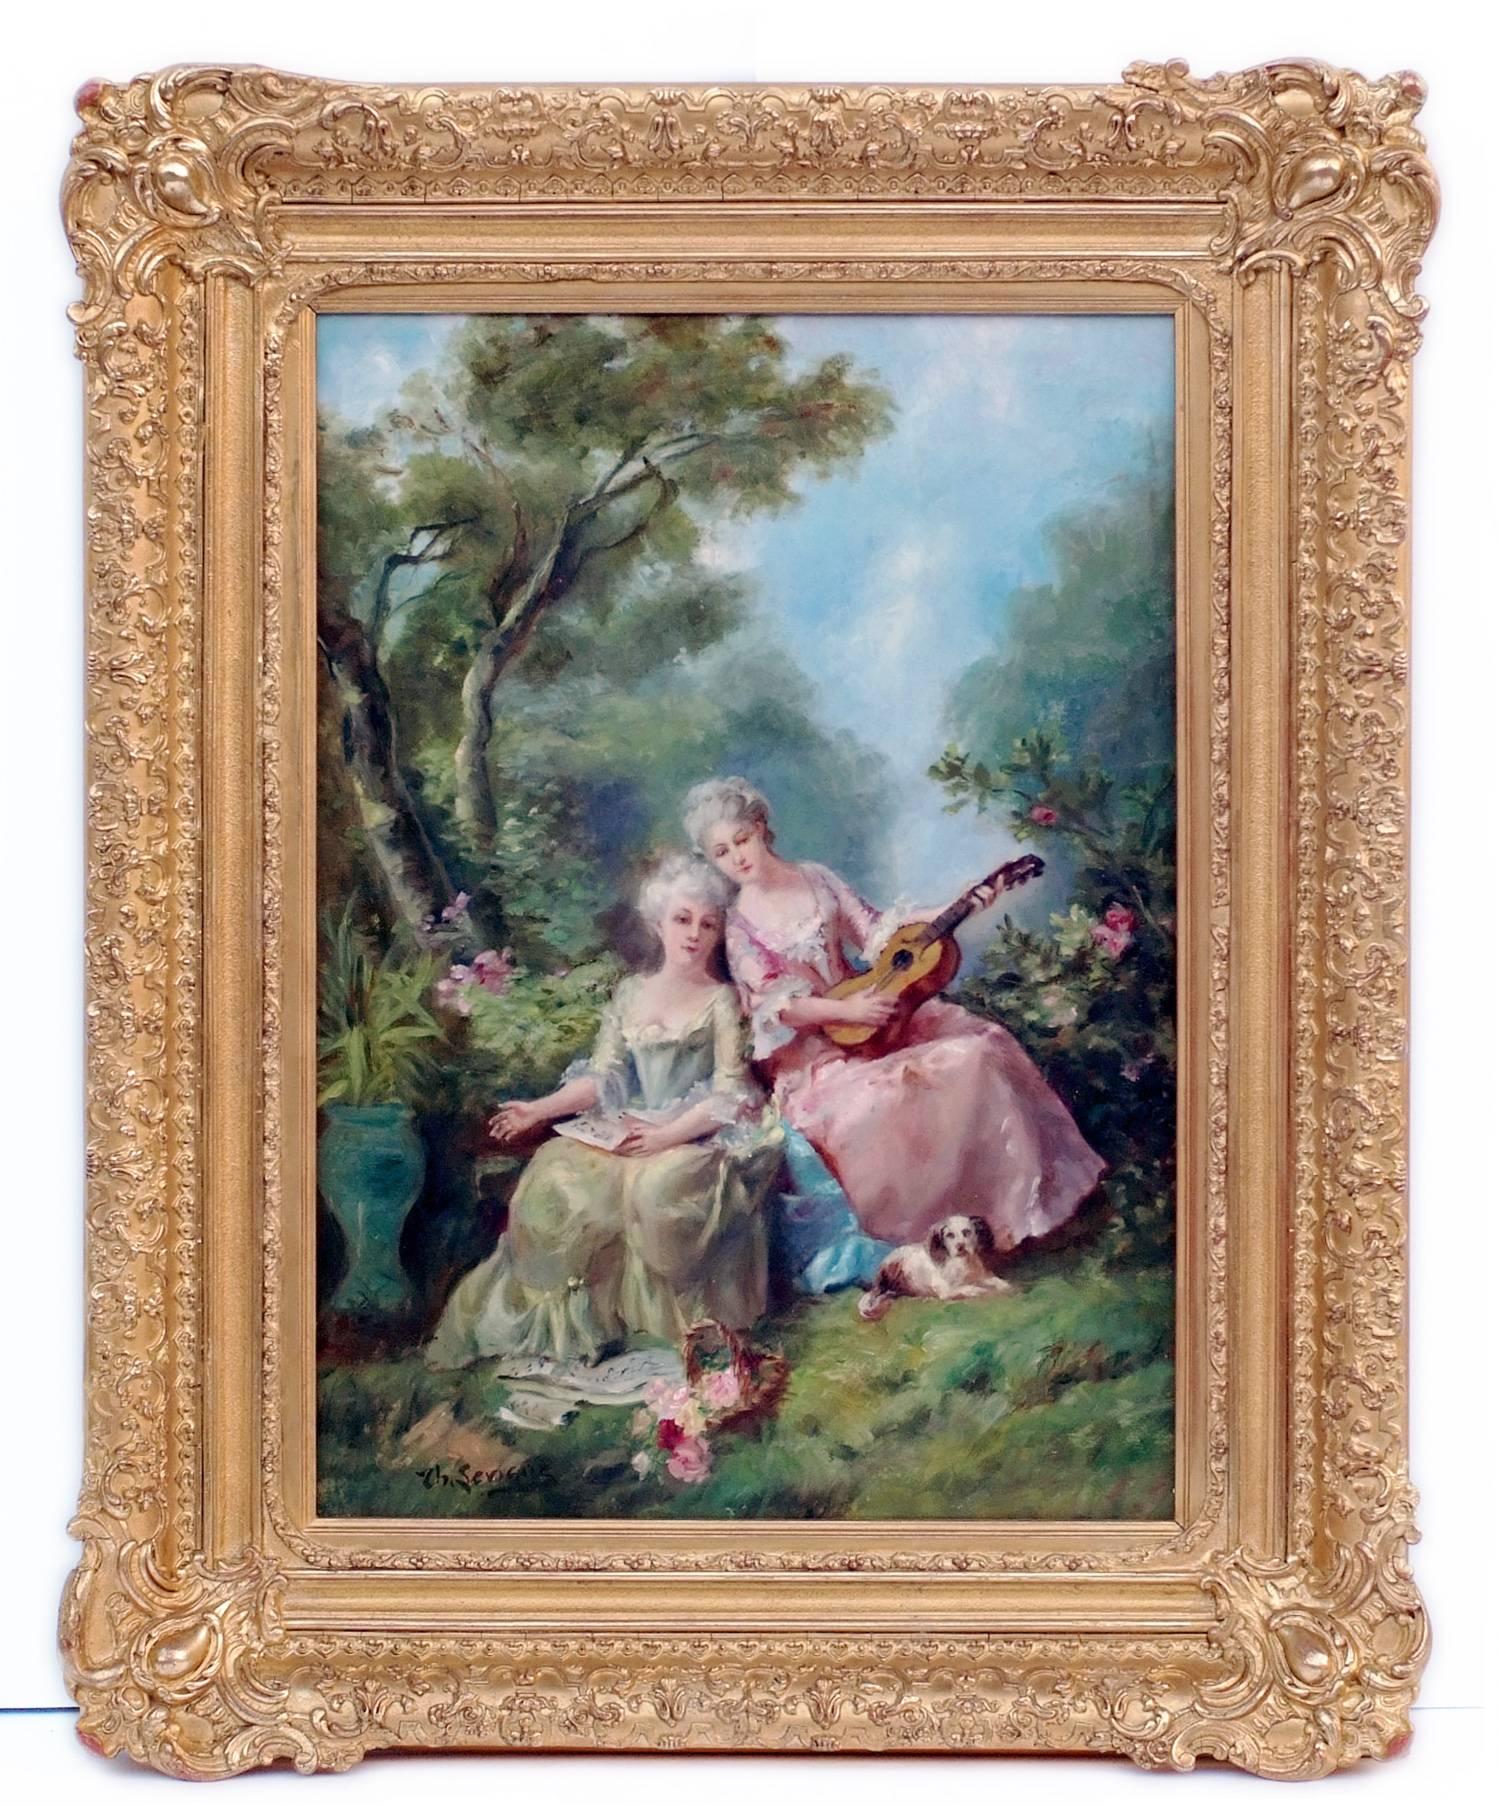 Painting 19th Century Showing Women Playing Music in 18th Century